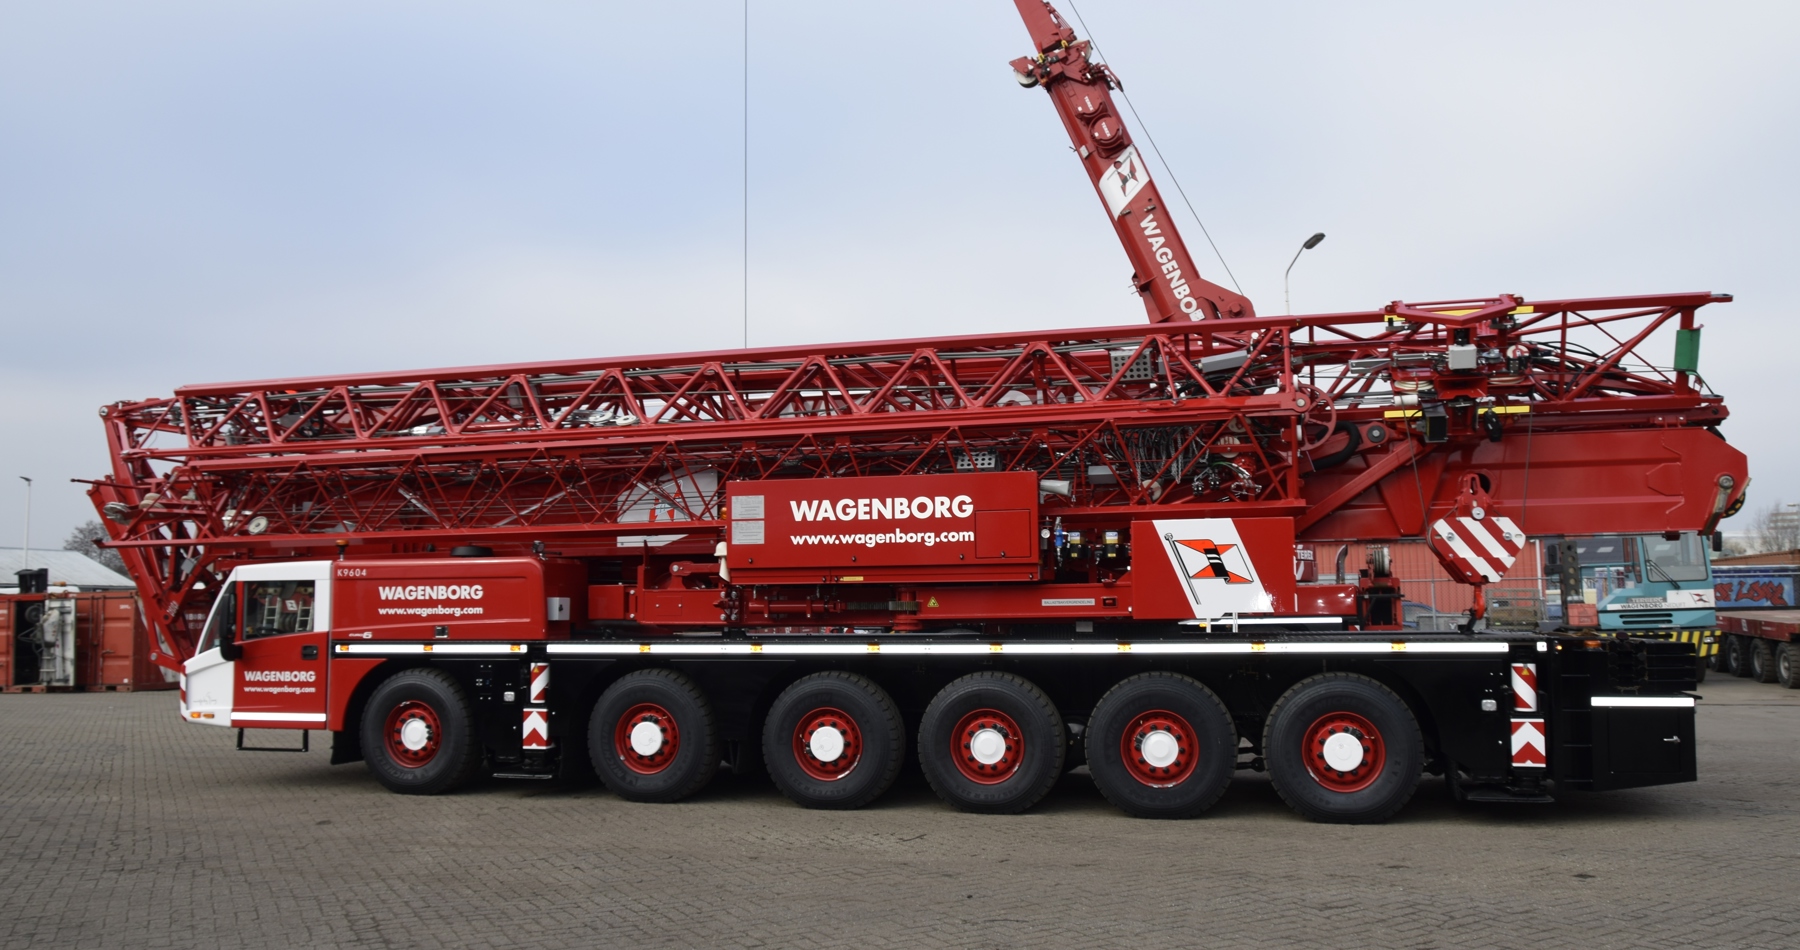 6th new Spierings mobile tower crane has arrived